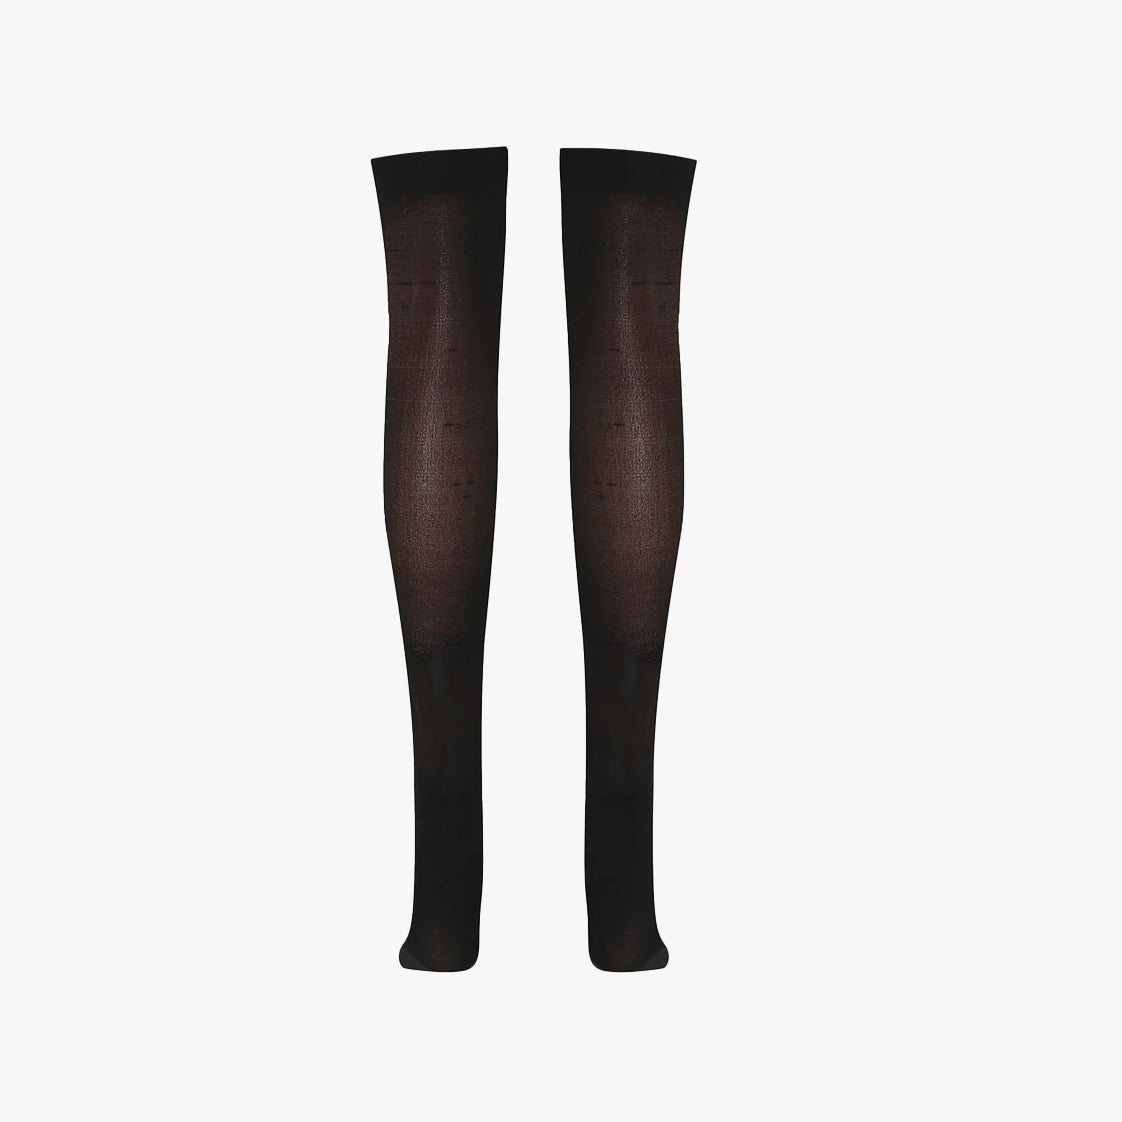 Grunge Over The Knee Stockings